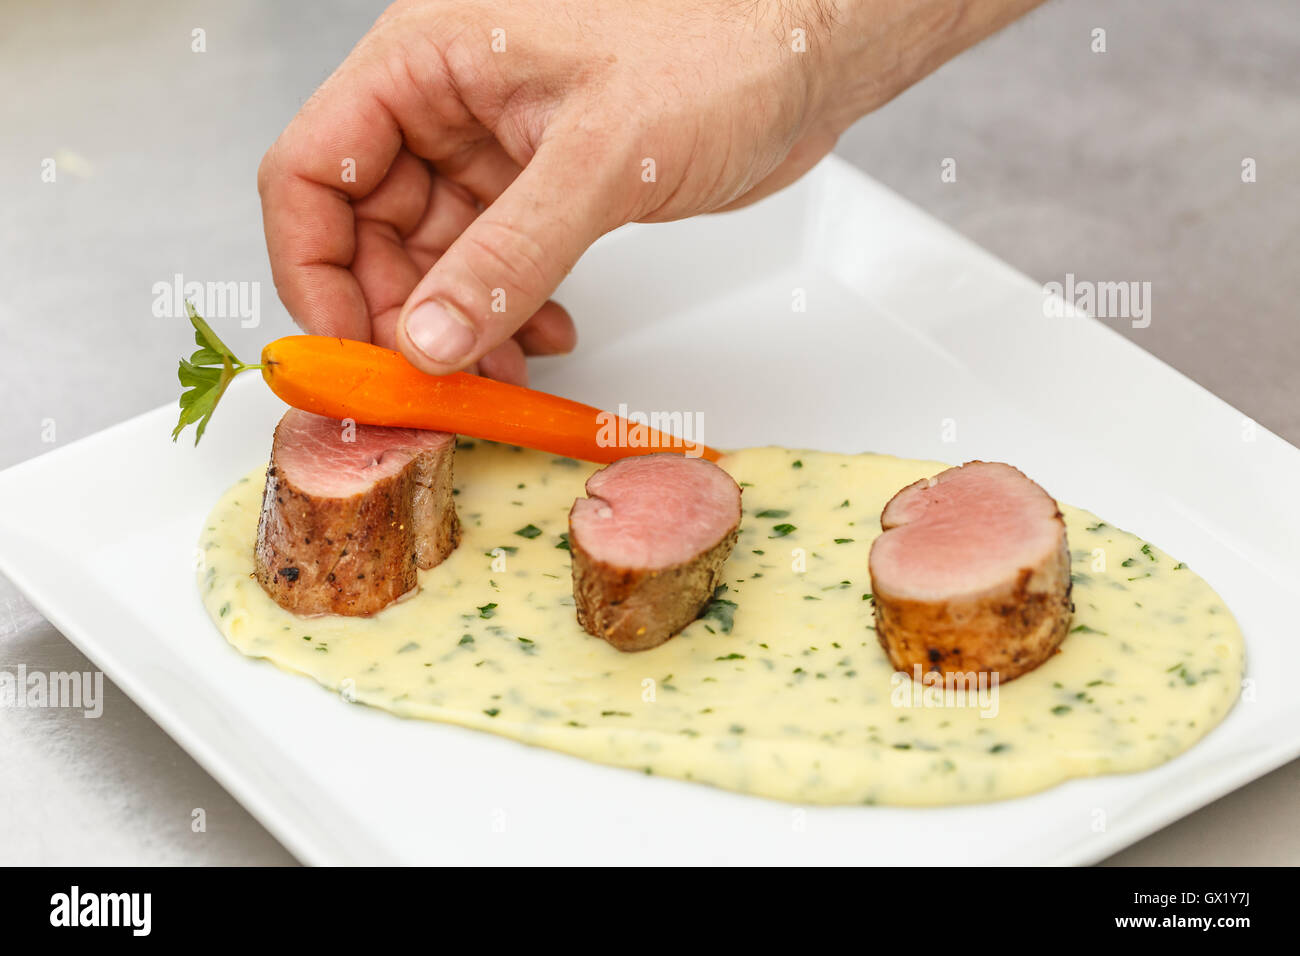 Chef garnishing dish with carrot, fine dining Stock Photo